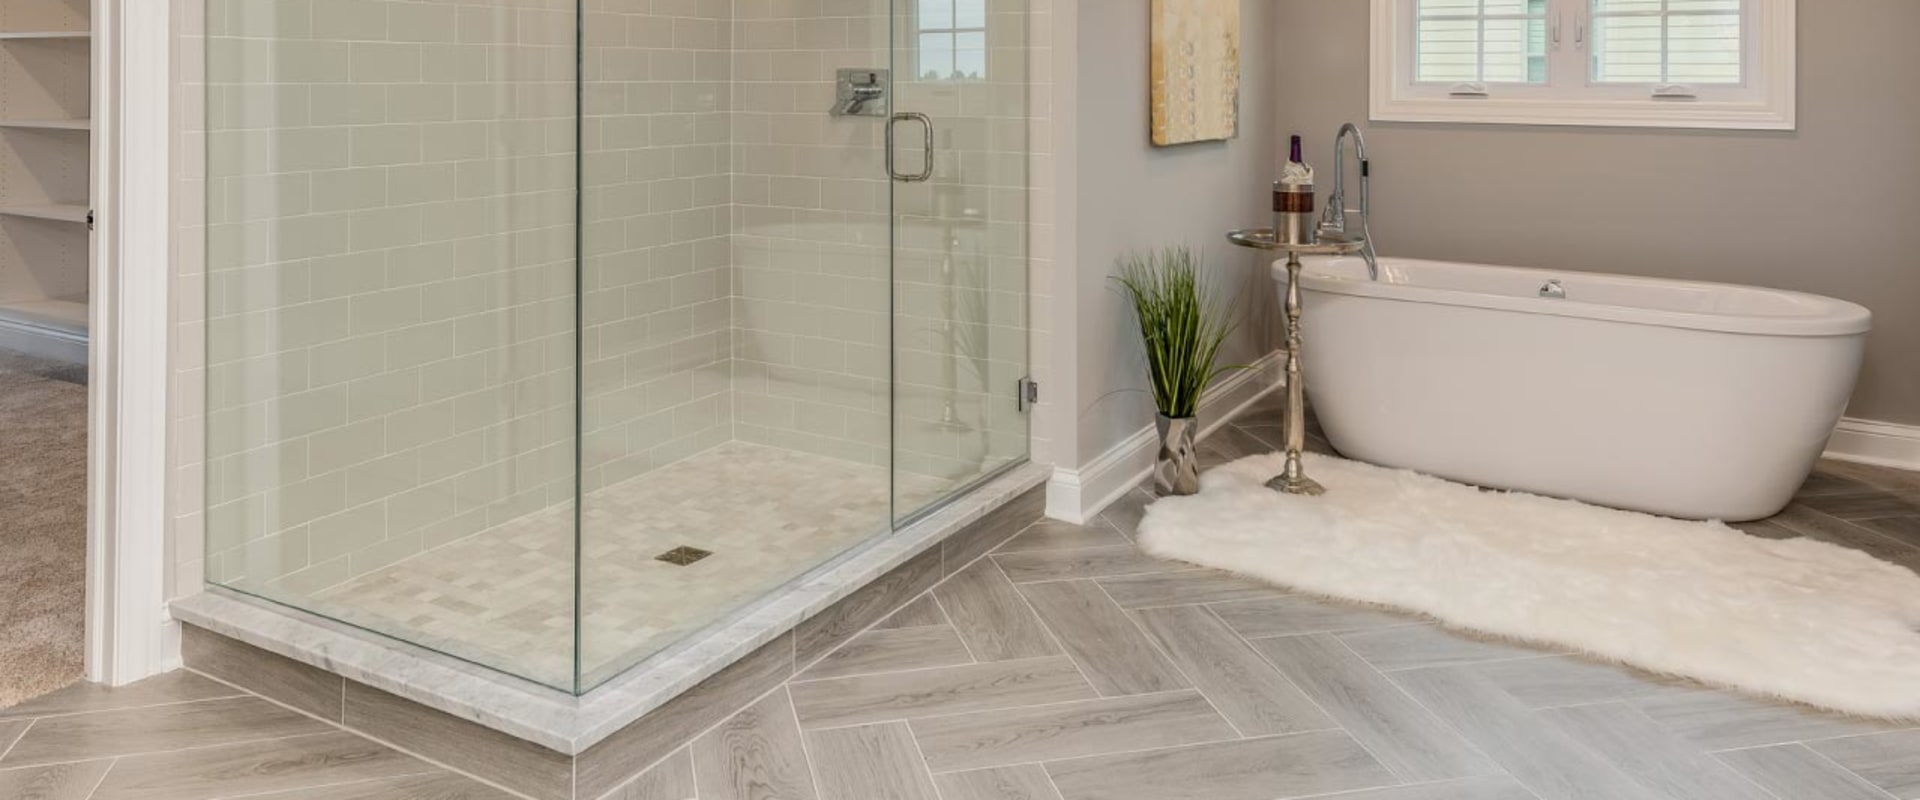 Pros Of Hiring Tub And Shower Glass Services In Northern VA After A Home Inspection